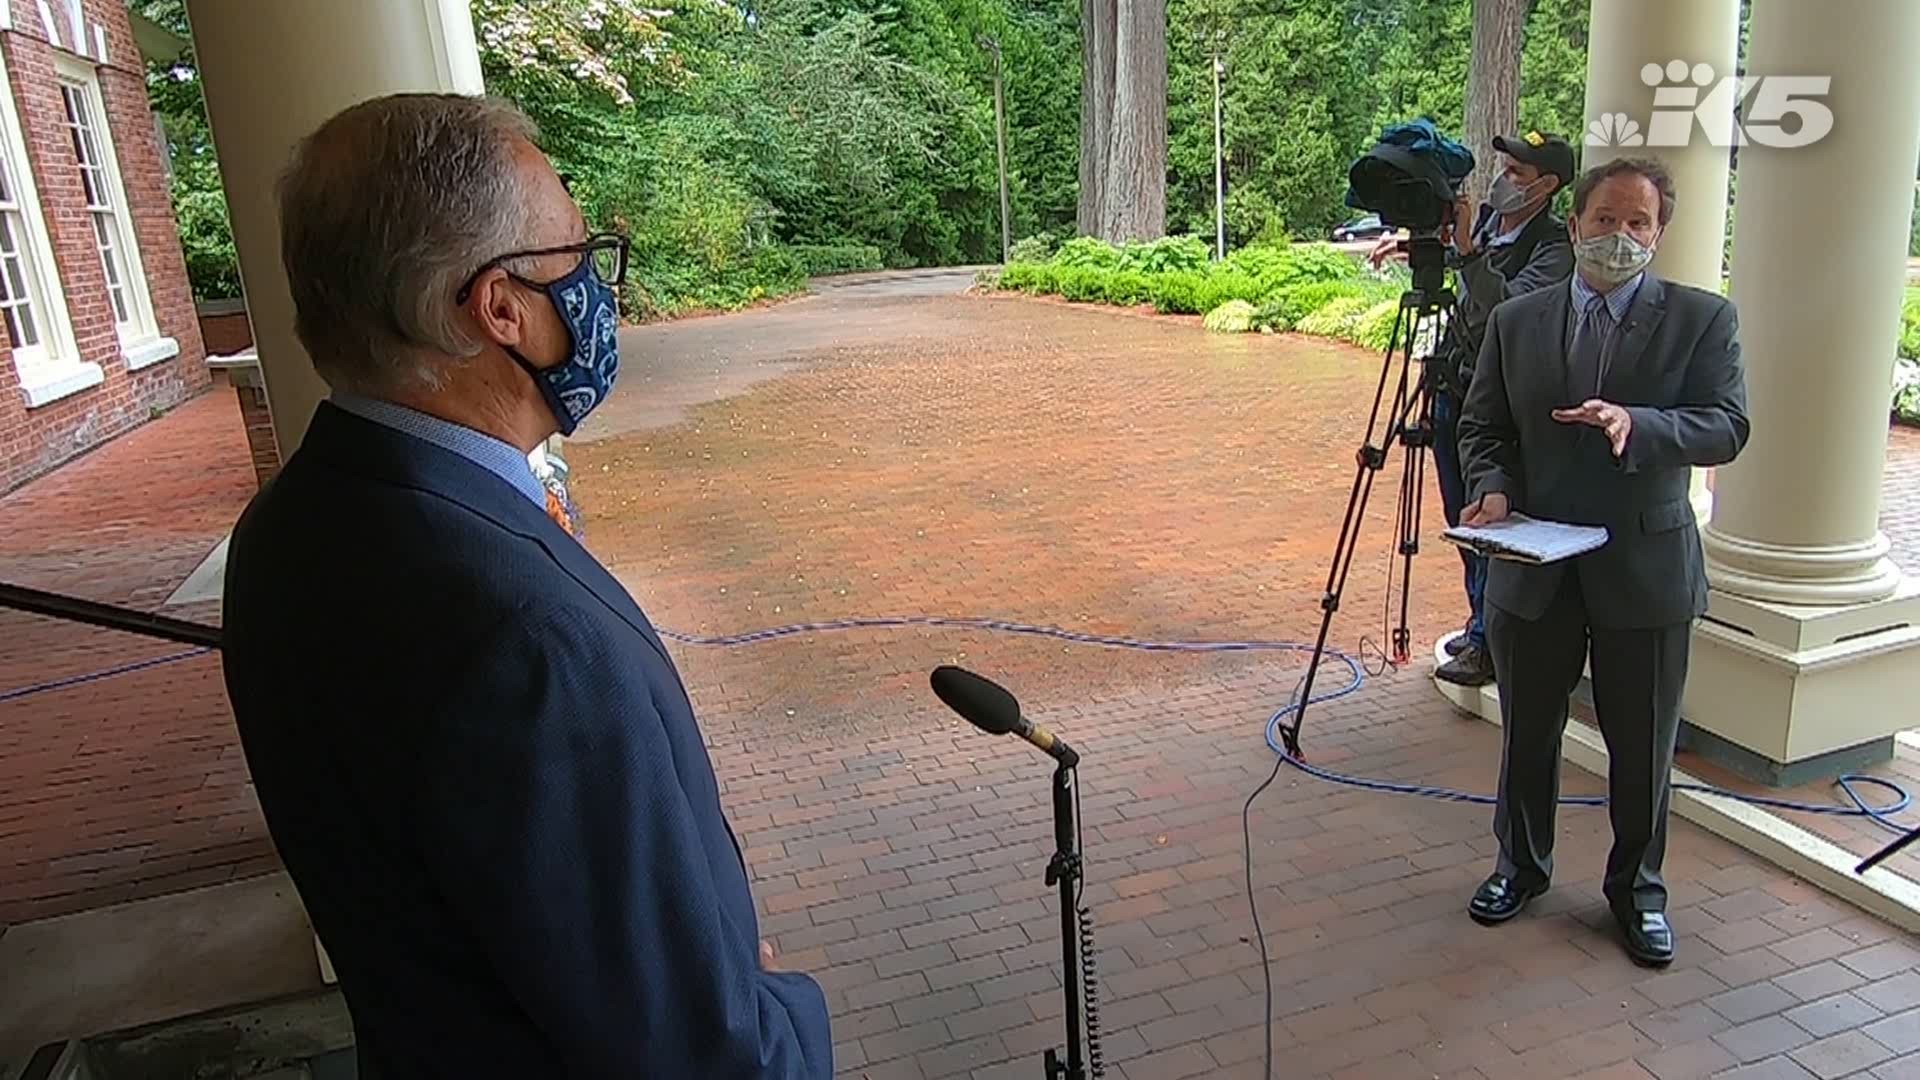 Gov. Jay Inslee spoke with KING 5 on compliance with the statewide mask order and on Seattle's handling of the 'CHOP' zone